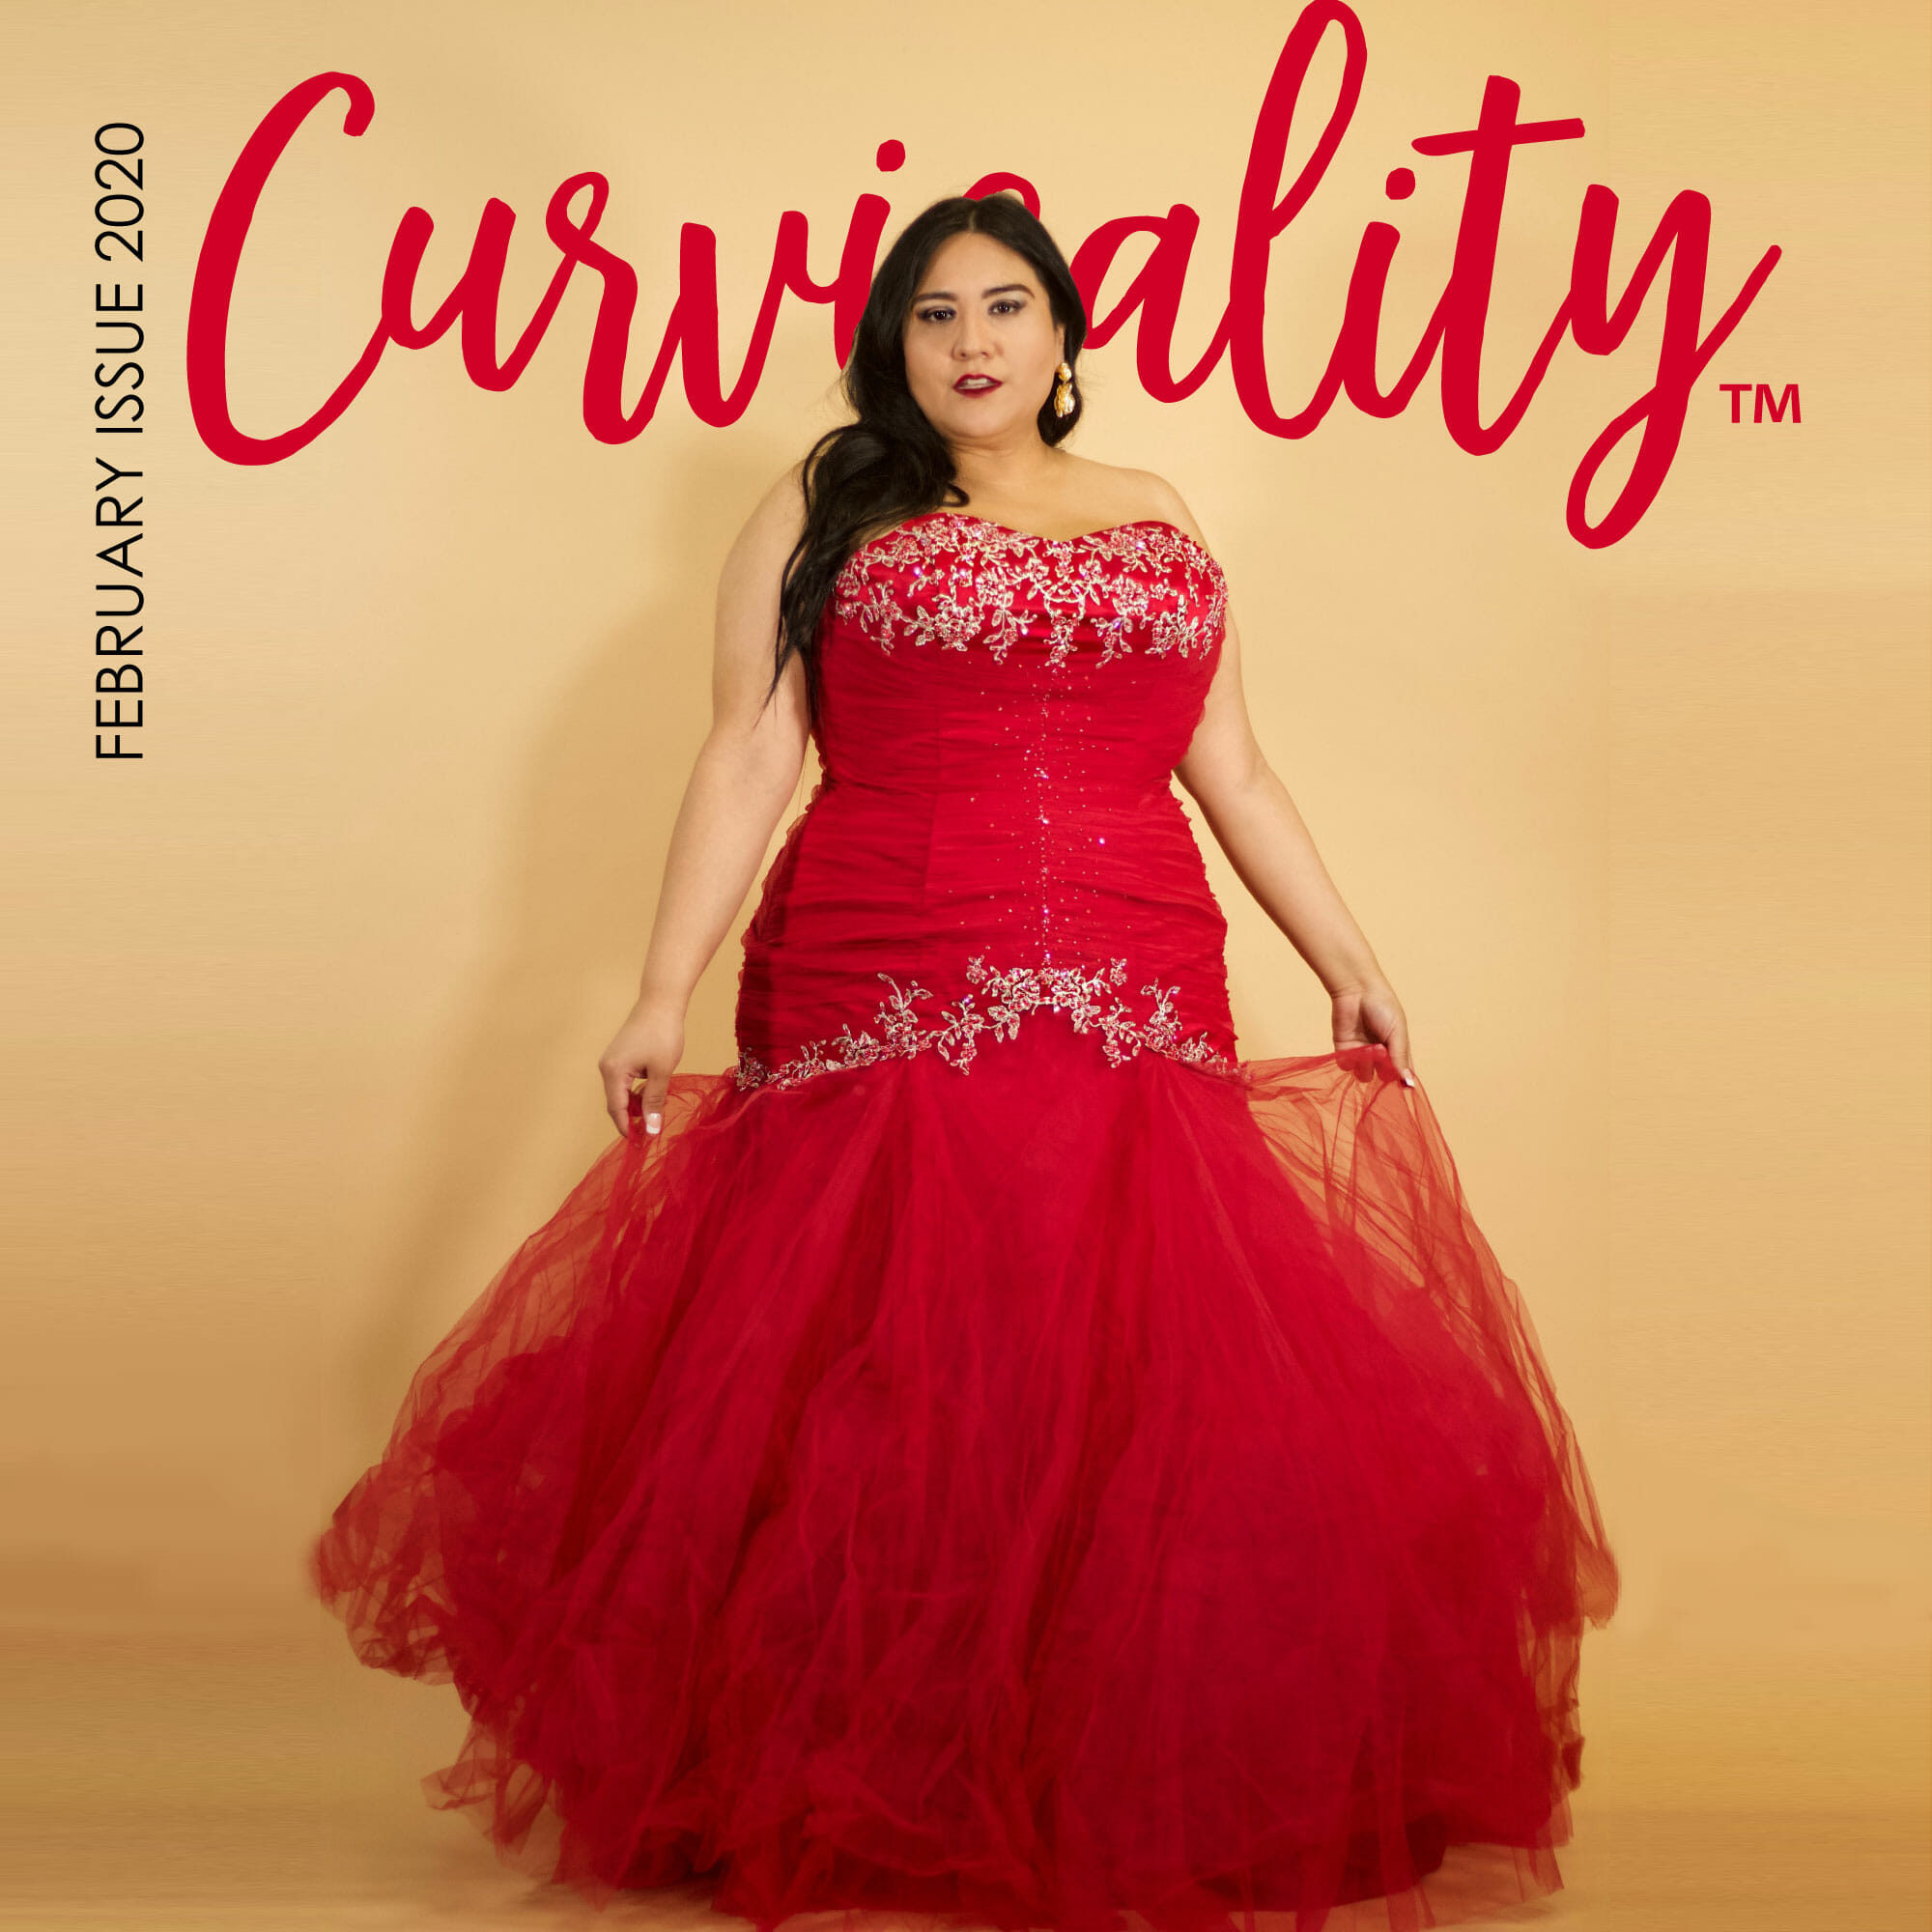 Curvicality: Where Your Curves are an Asset 2020 - Curvicality magazine - the community for plus-size women